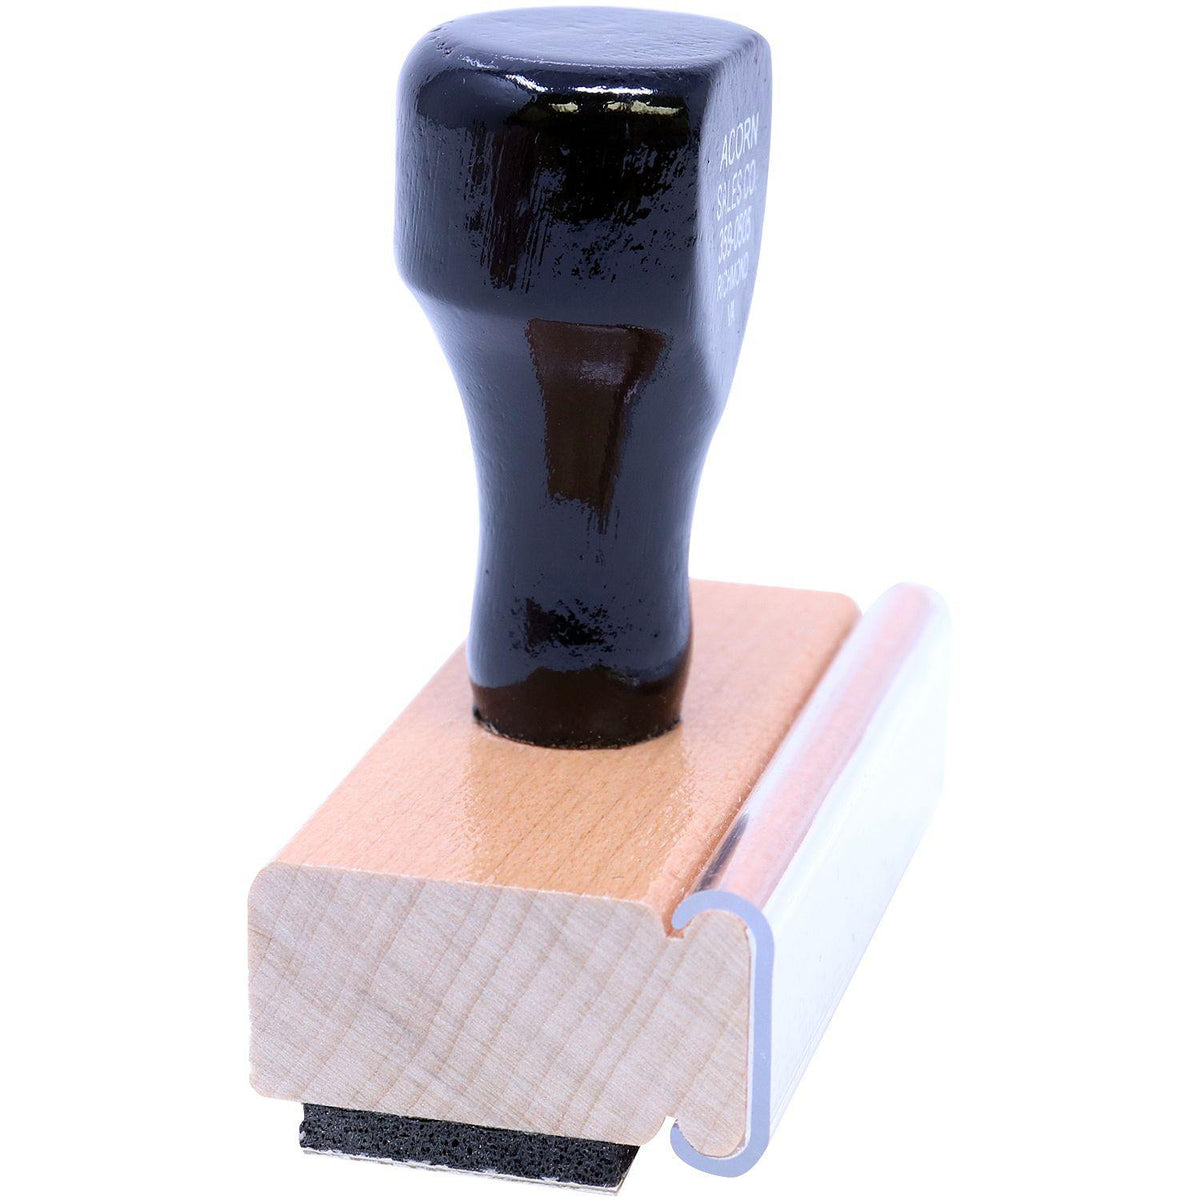 Managed Care Rubber Stamp - Engineer Seal Stamps - Brand_Acorn, Impression Size_Small, Stamp Type_Regular Stamp, Type of Use_Medical Office